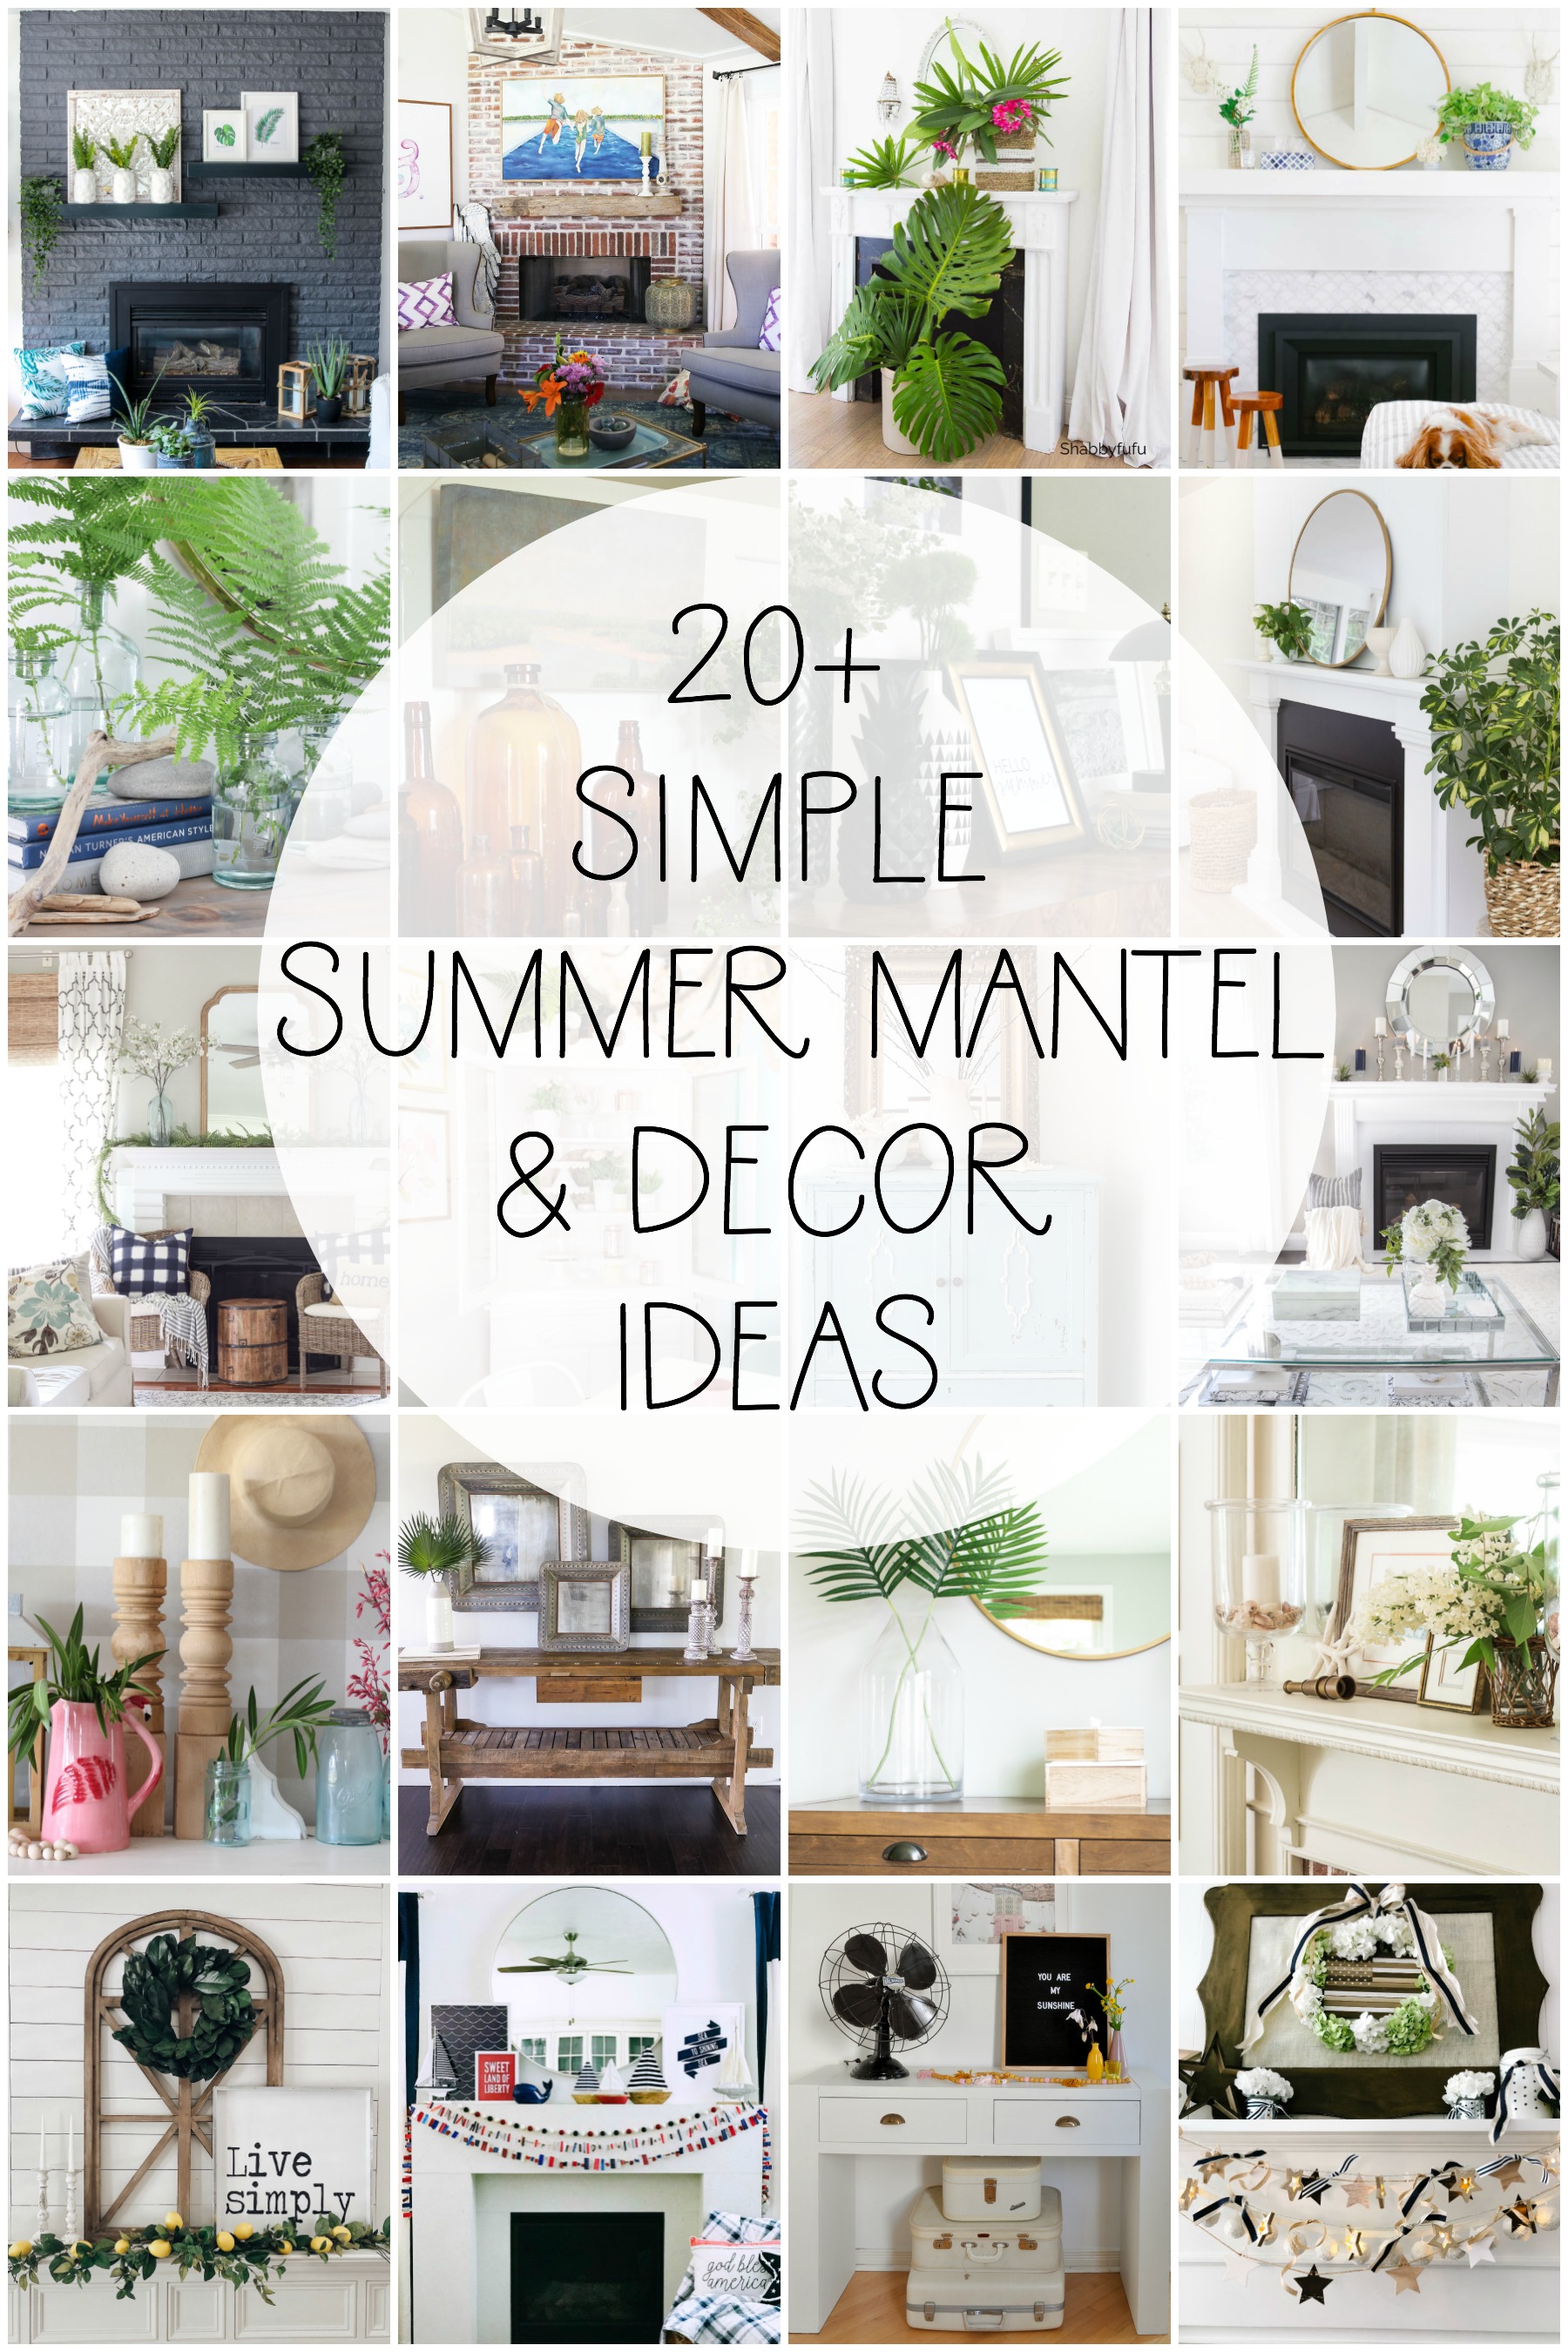 20+ simple summer mantel and decor ideas poster.